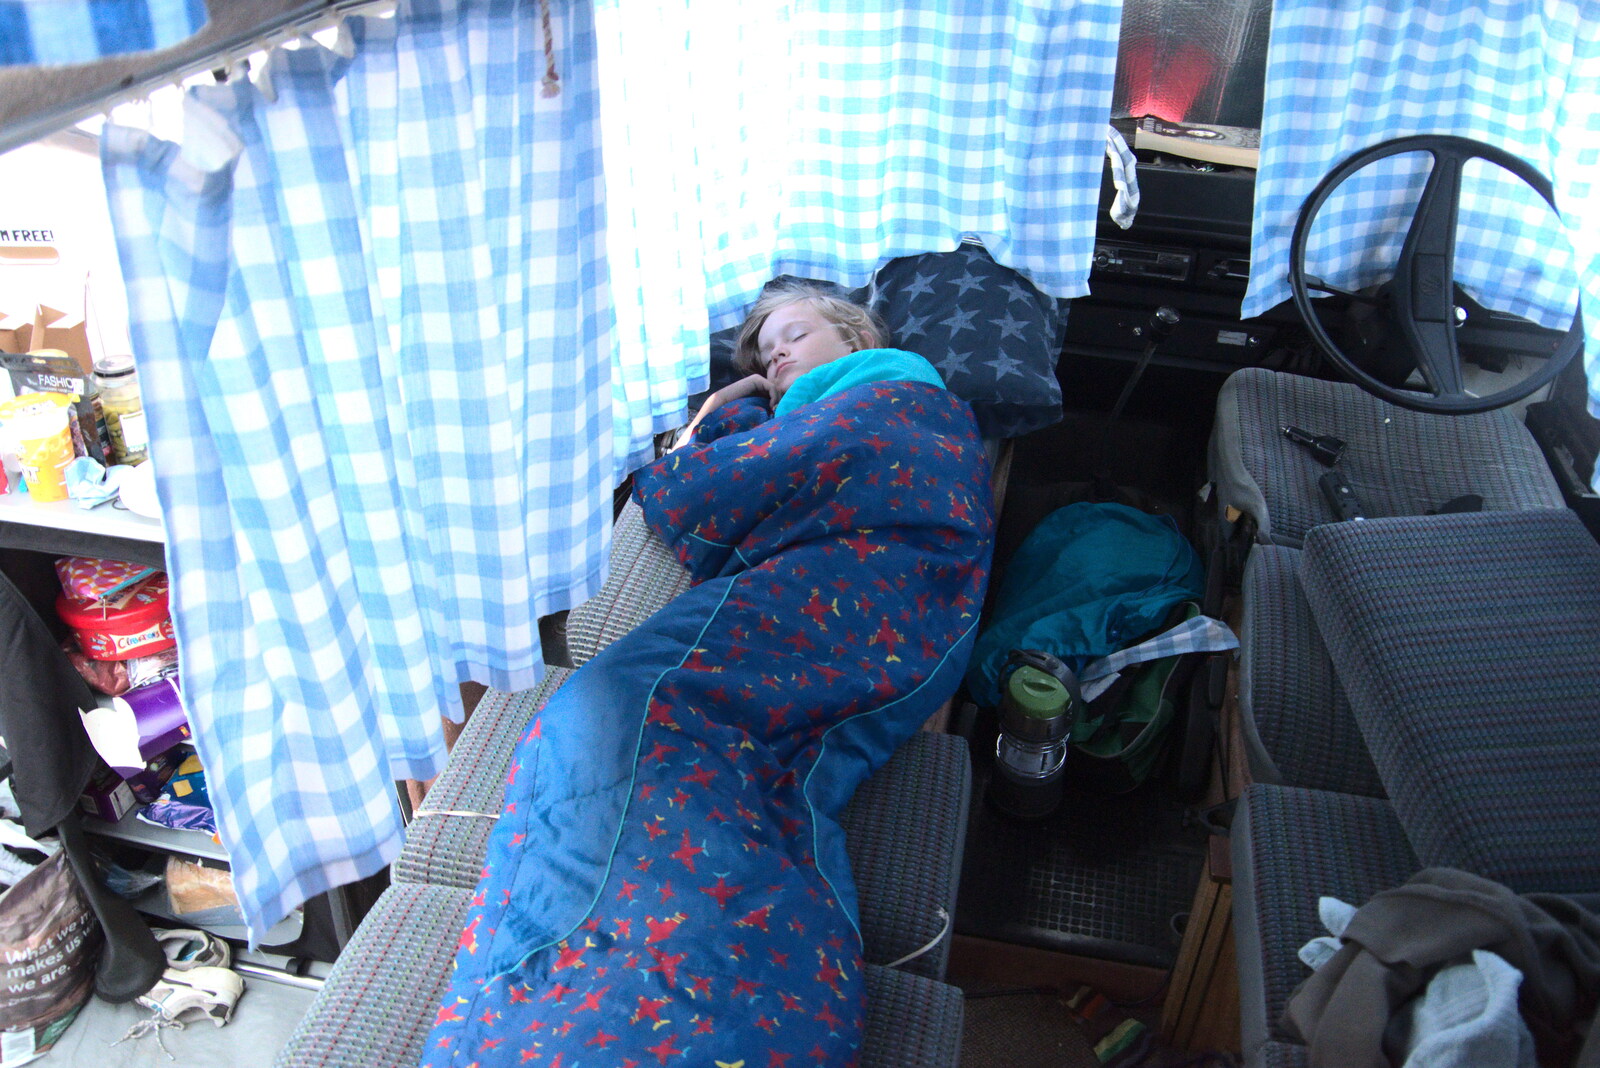 Harry's asleep in the van from Camping on the Coast, East Runton, North Norfolk - 25th July 2020